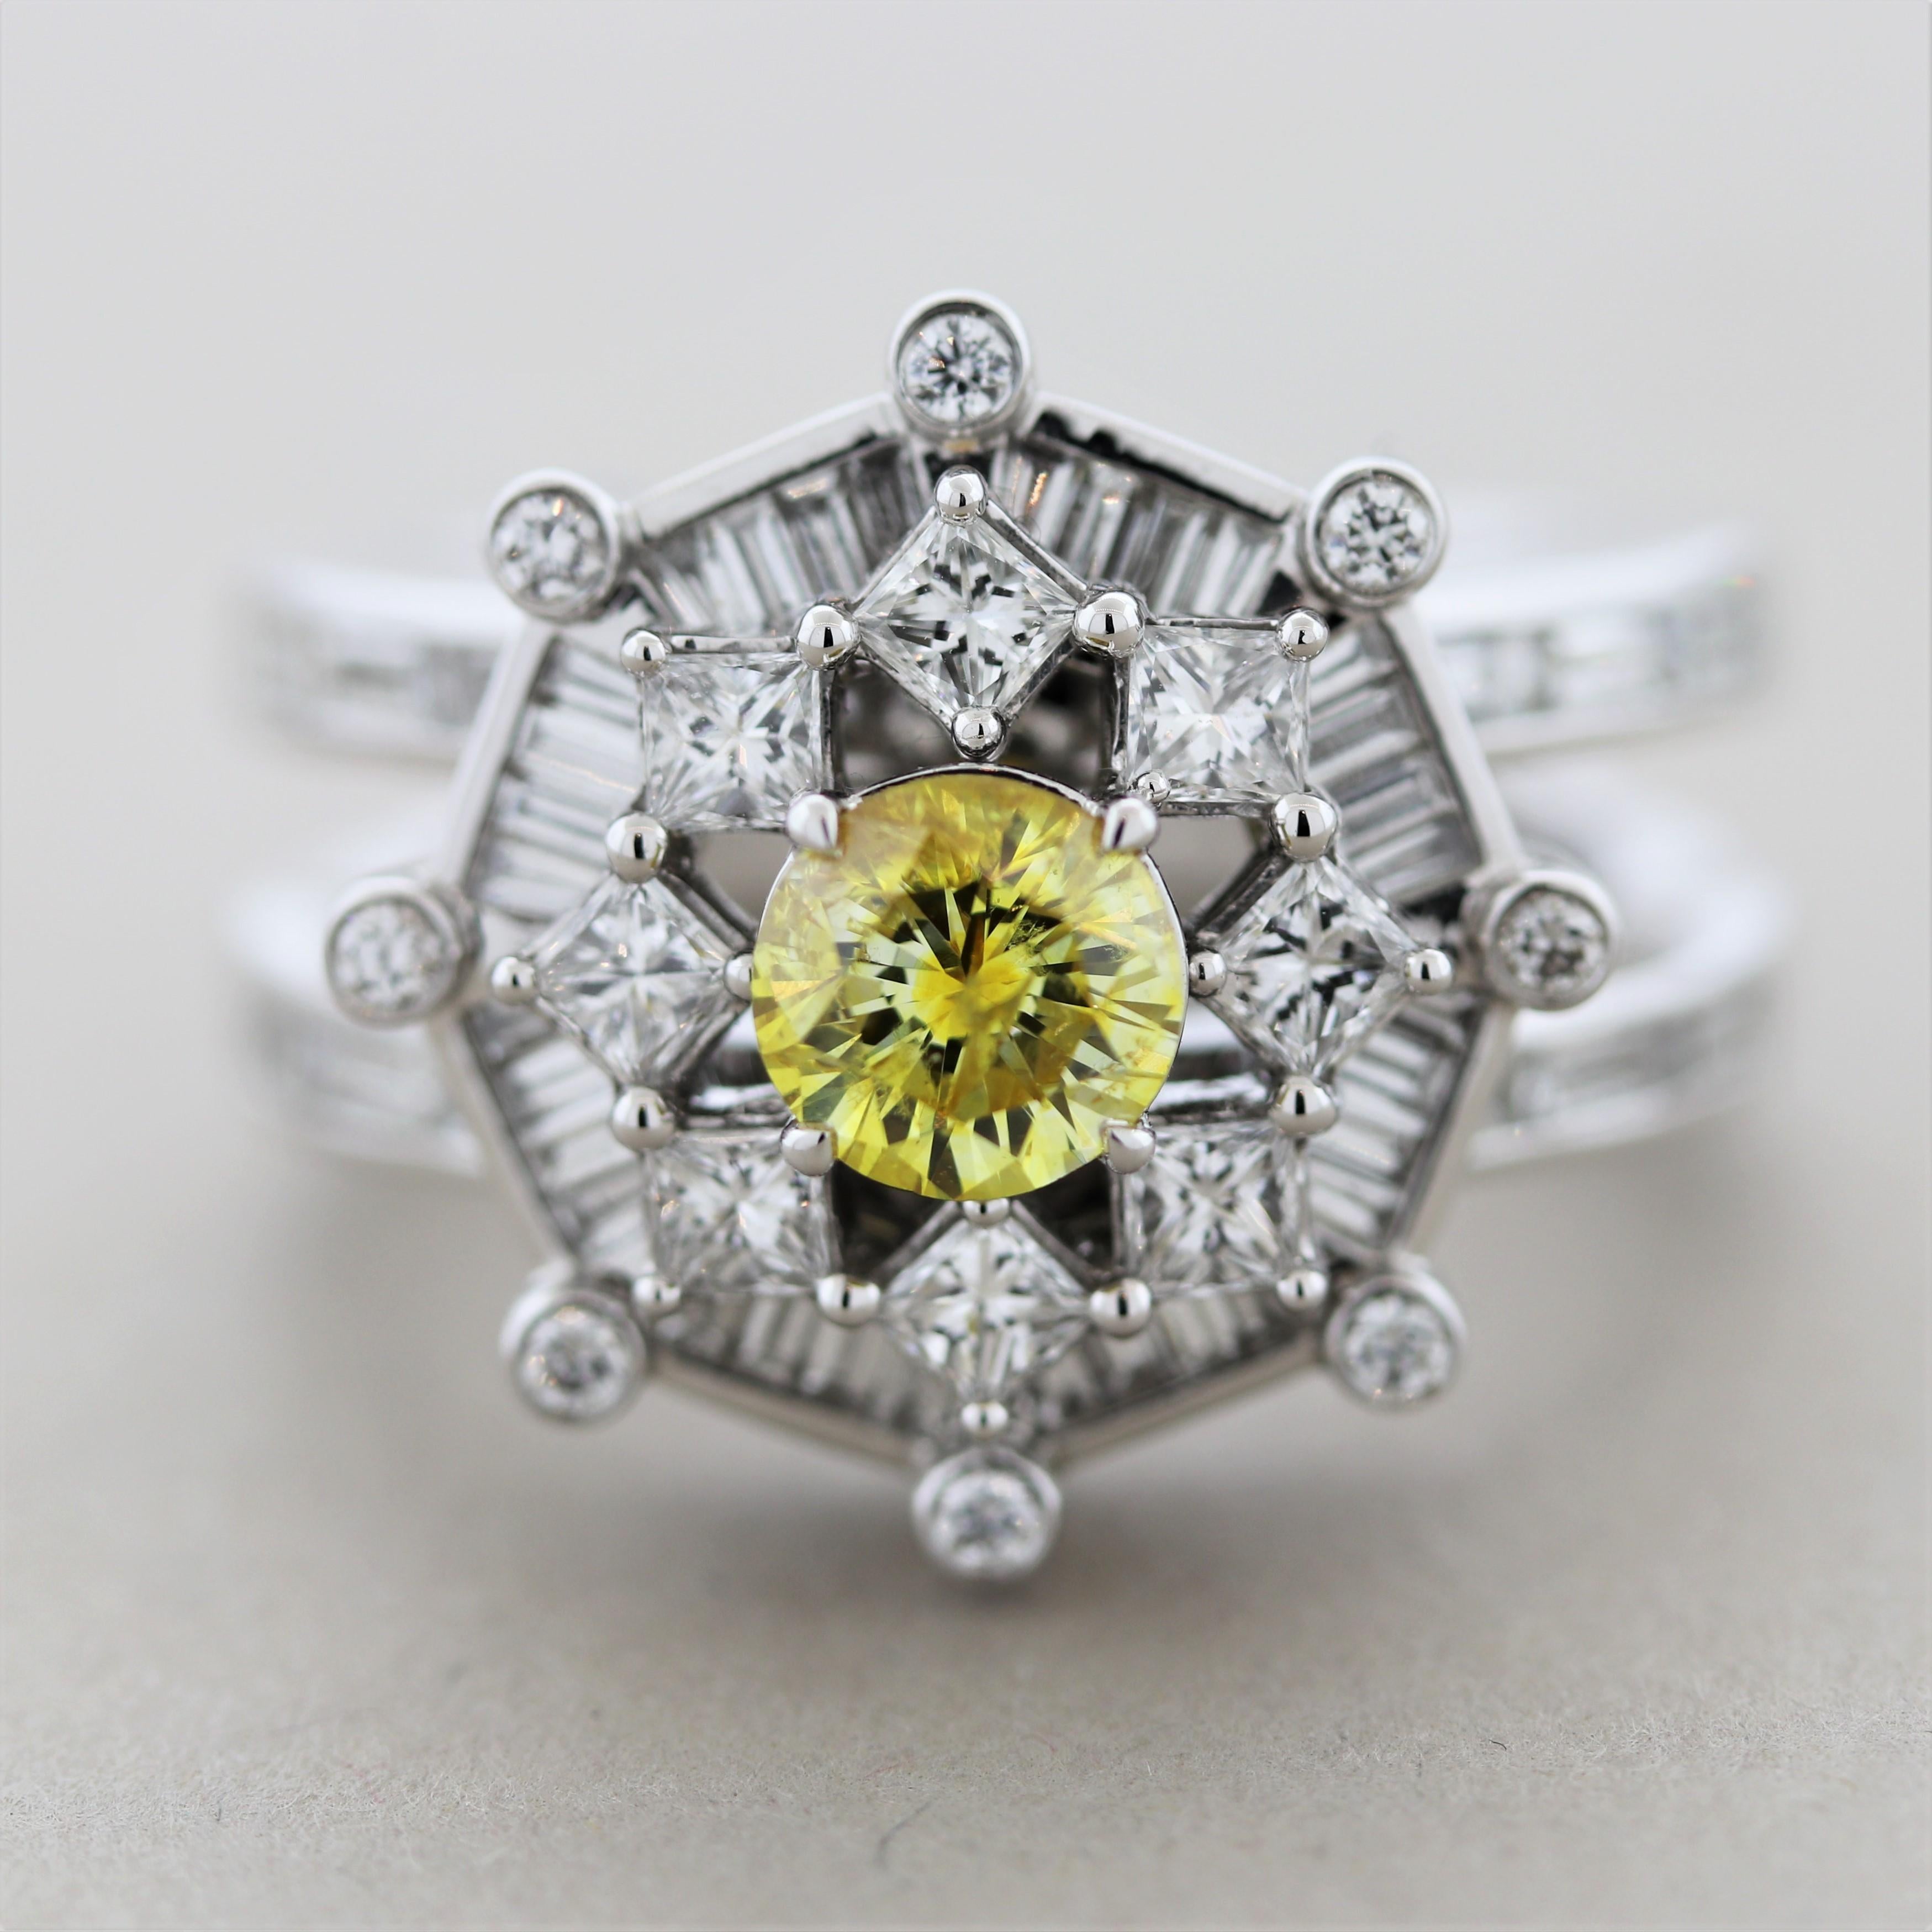 A simple yet classic engagement style ring featuring a 1.46 carat princess-cut diamond with a fancy light yellow color. It is complemented by 4 white baguette-cut diamonds set on its sides. Hand-fabricated in platinum, and ready for any